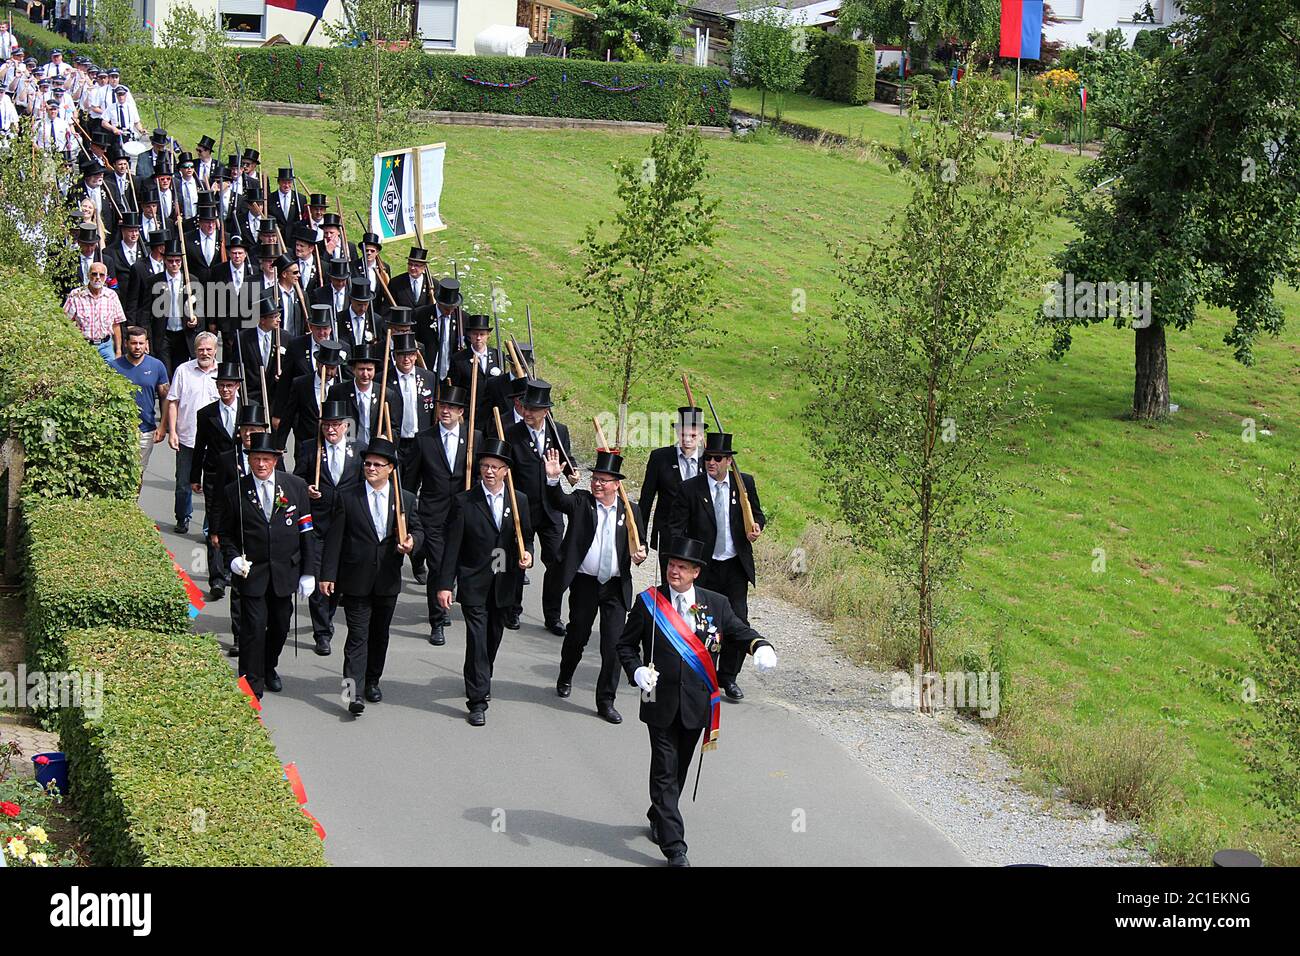 Festive procession of the associations of marksmen through residential area at a traditional German Schützenfest (marksmen's festival) in Lügde. Stock Photo